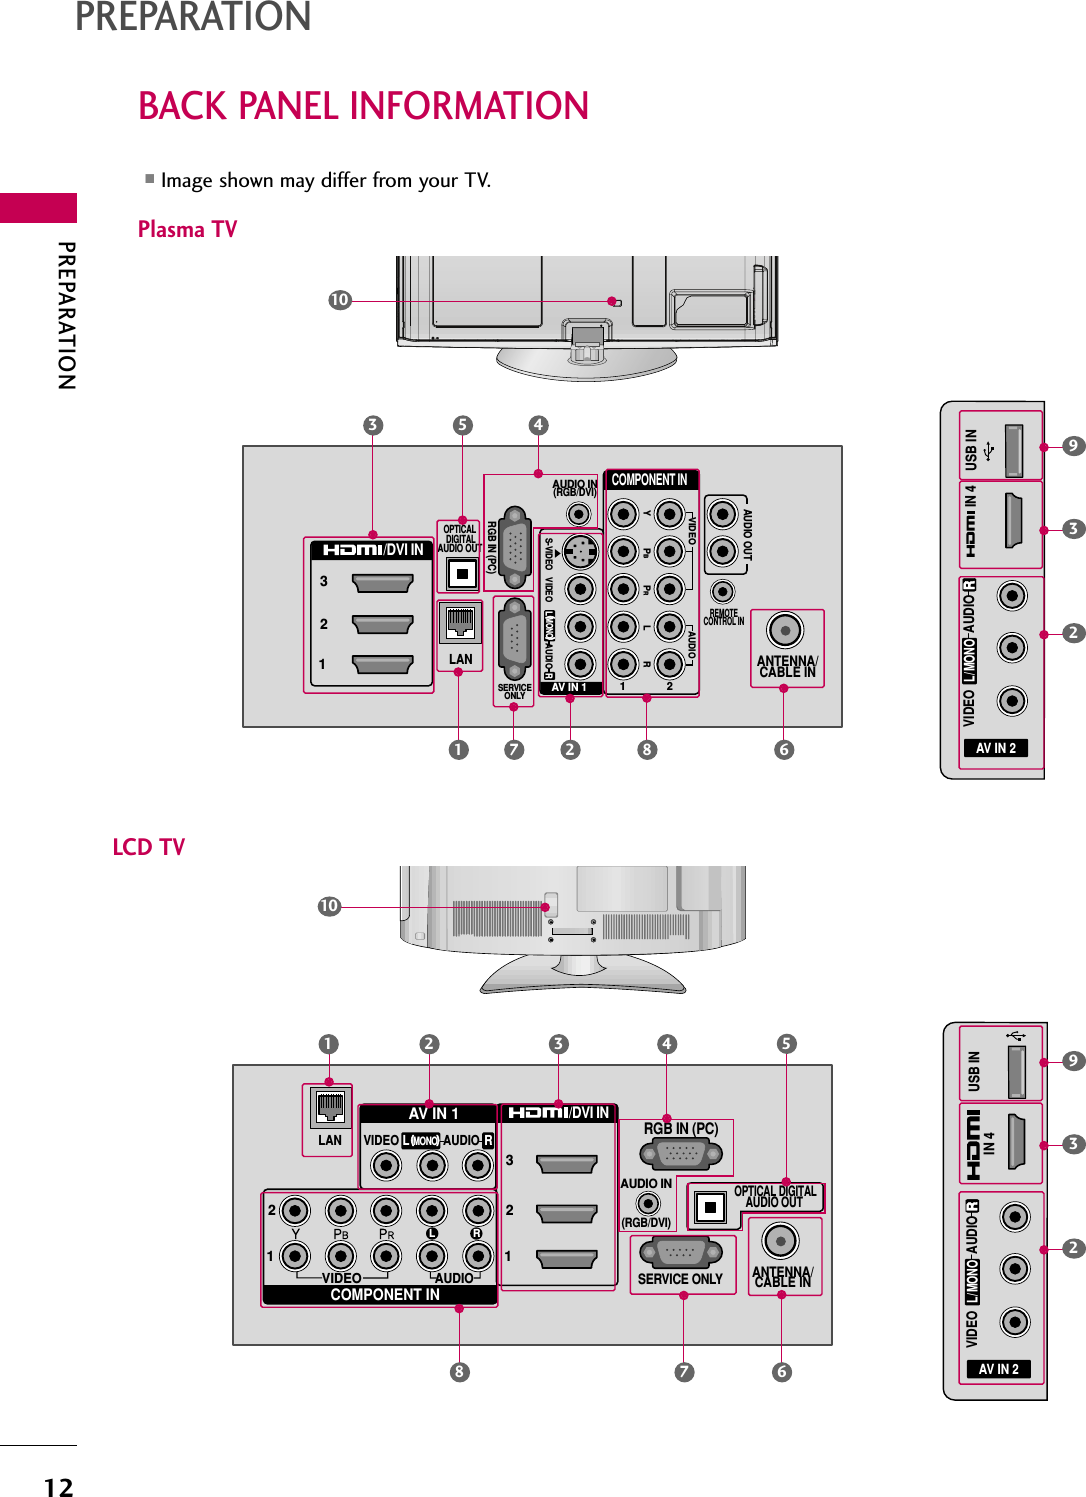 PREPARATION12BACK PANEL INFORMATIONPREPARATION■Image shown may differ from your TV.(            )(            )(            )R10VIDEOAUDIOL RSERVICE ONLYAUDIO IN(RGB/DVI)OPTICAL DIGITALAUDIO OUT ANTENNA/CABLE INRGB IN (PC)AV IN 1COMPONENT IN23121MONO(                        )AUDIOVIDEOLAN/DVI IN(            )LR(            )R2 37 68(            )(            )(            )AV IN 2L/MONORAUDIOVIDEOUSB ININ 42935R(            )(            ) (            )101R213/DVI INCOMPONENT INANTENNA/CABLE INOPTICAL DIGITALAUDIO OUT RGB IN (PC)LANSERVICEONLYAUDIO IN(RGB/DVI)AUDIO OUTREMOTECONTROL INVIDEOAUDIO12LYPBPRRAUDIOVIDEOS-VIDEOMONO(                        )L RAV IN 1(            ) (            )3681 7 2AV IN 2L/MONORAUDIOVIDEOUSB ININ 4(            )(            ) (            )293Plasma TV LCD TV5 44